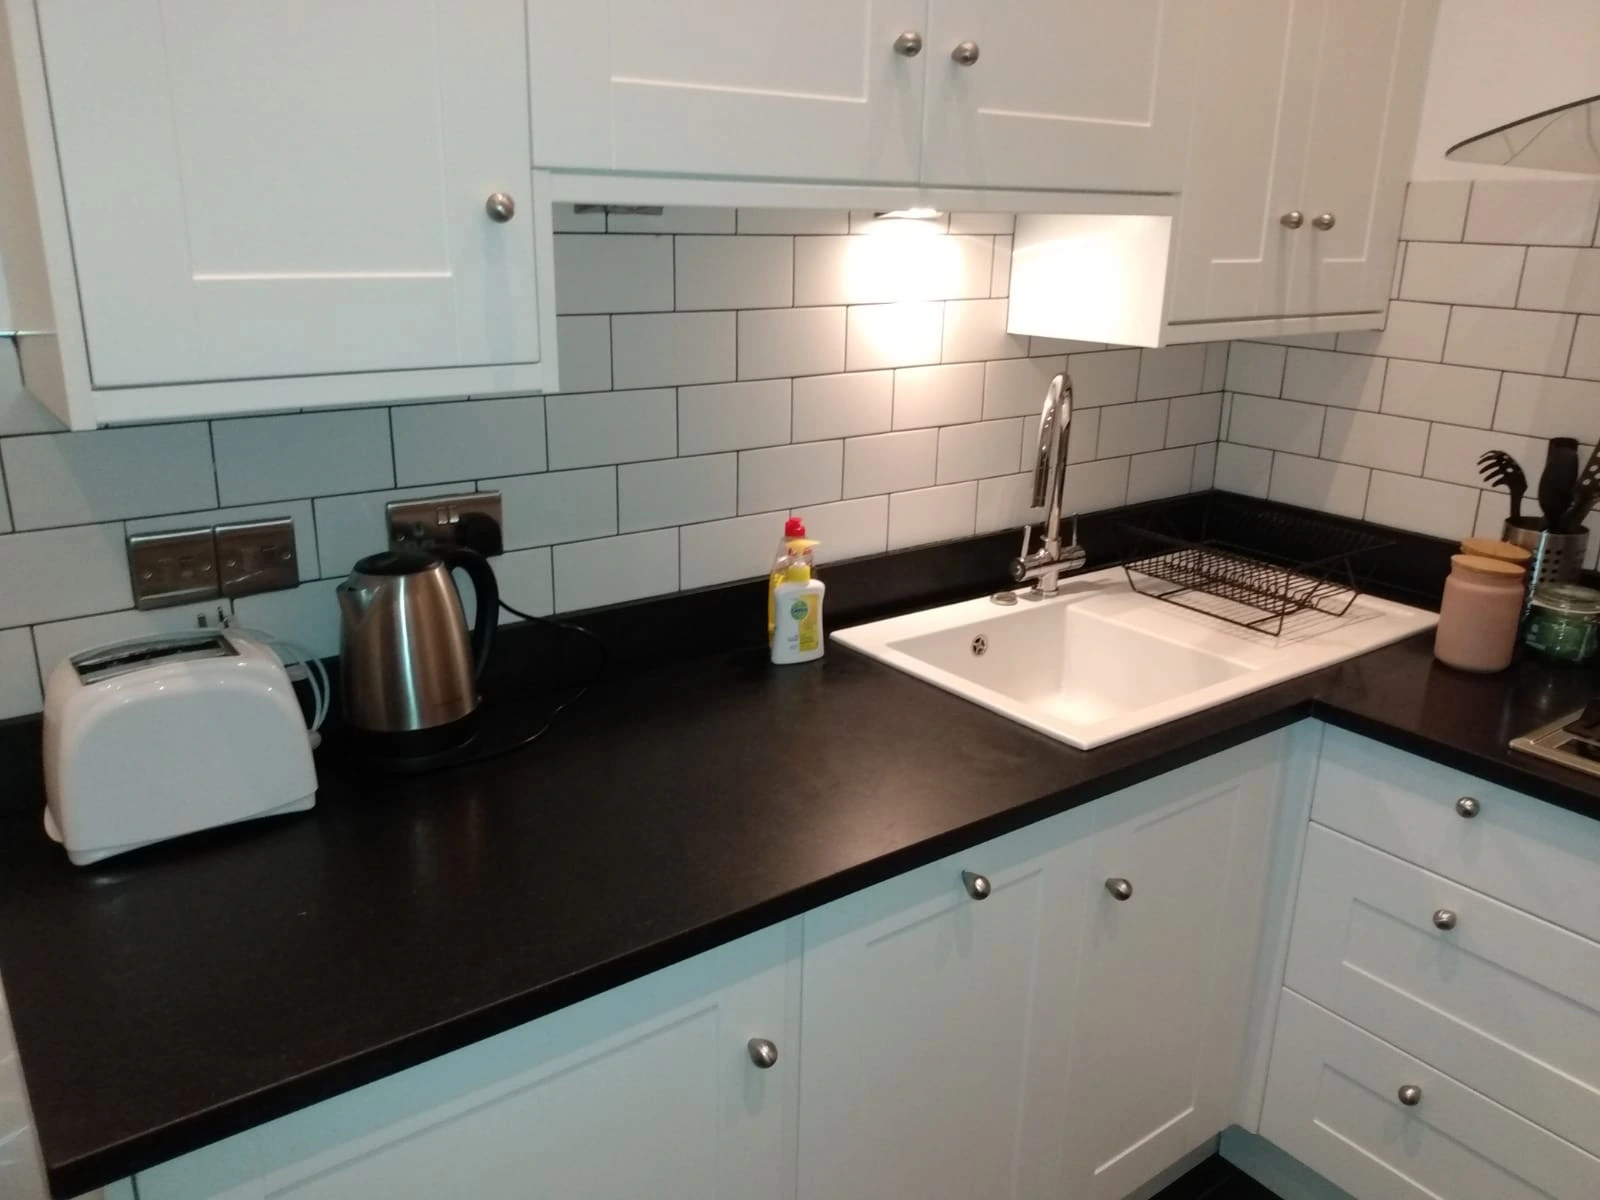 Domestic Kitchen Deep Cleaning Services London